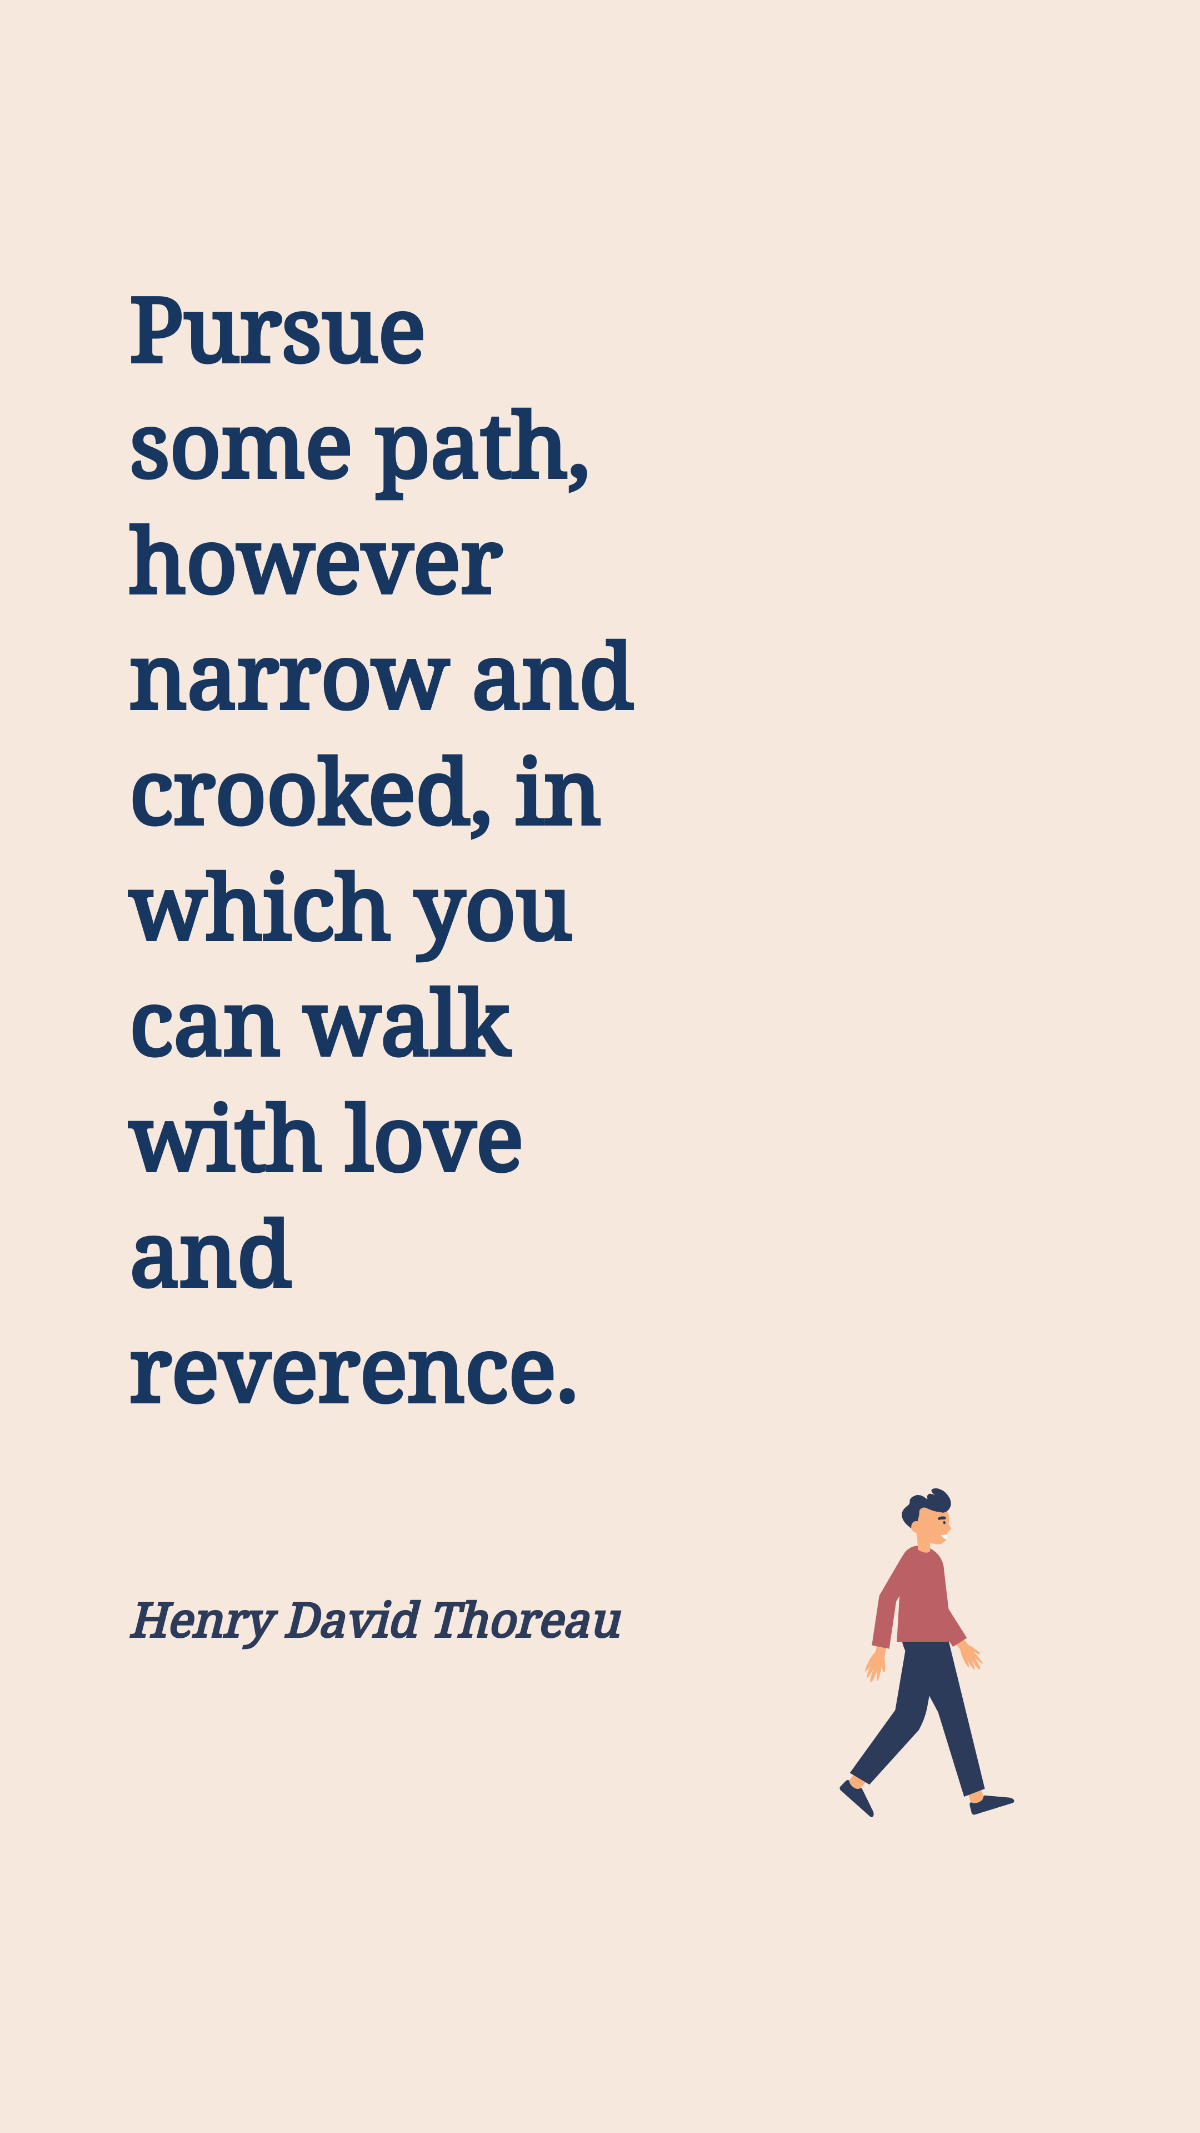 Free Henry David Thoreau - Pursue some path, however narrow and crooked, in which you can walk with love and reverence. Template